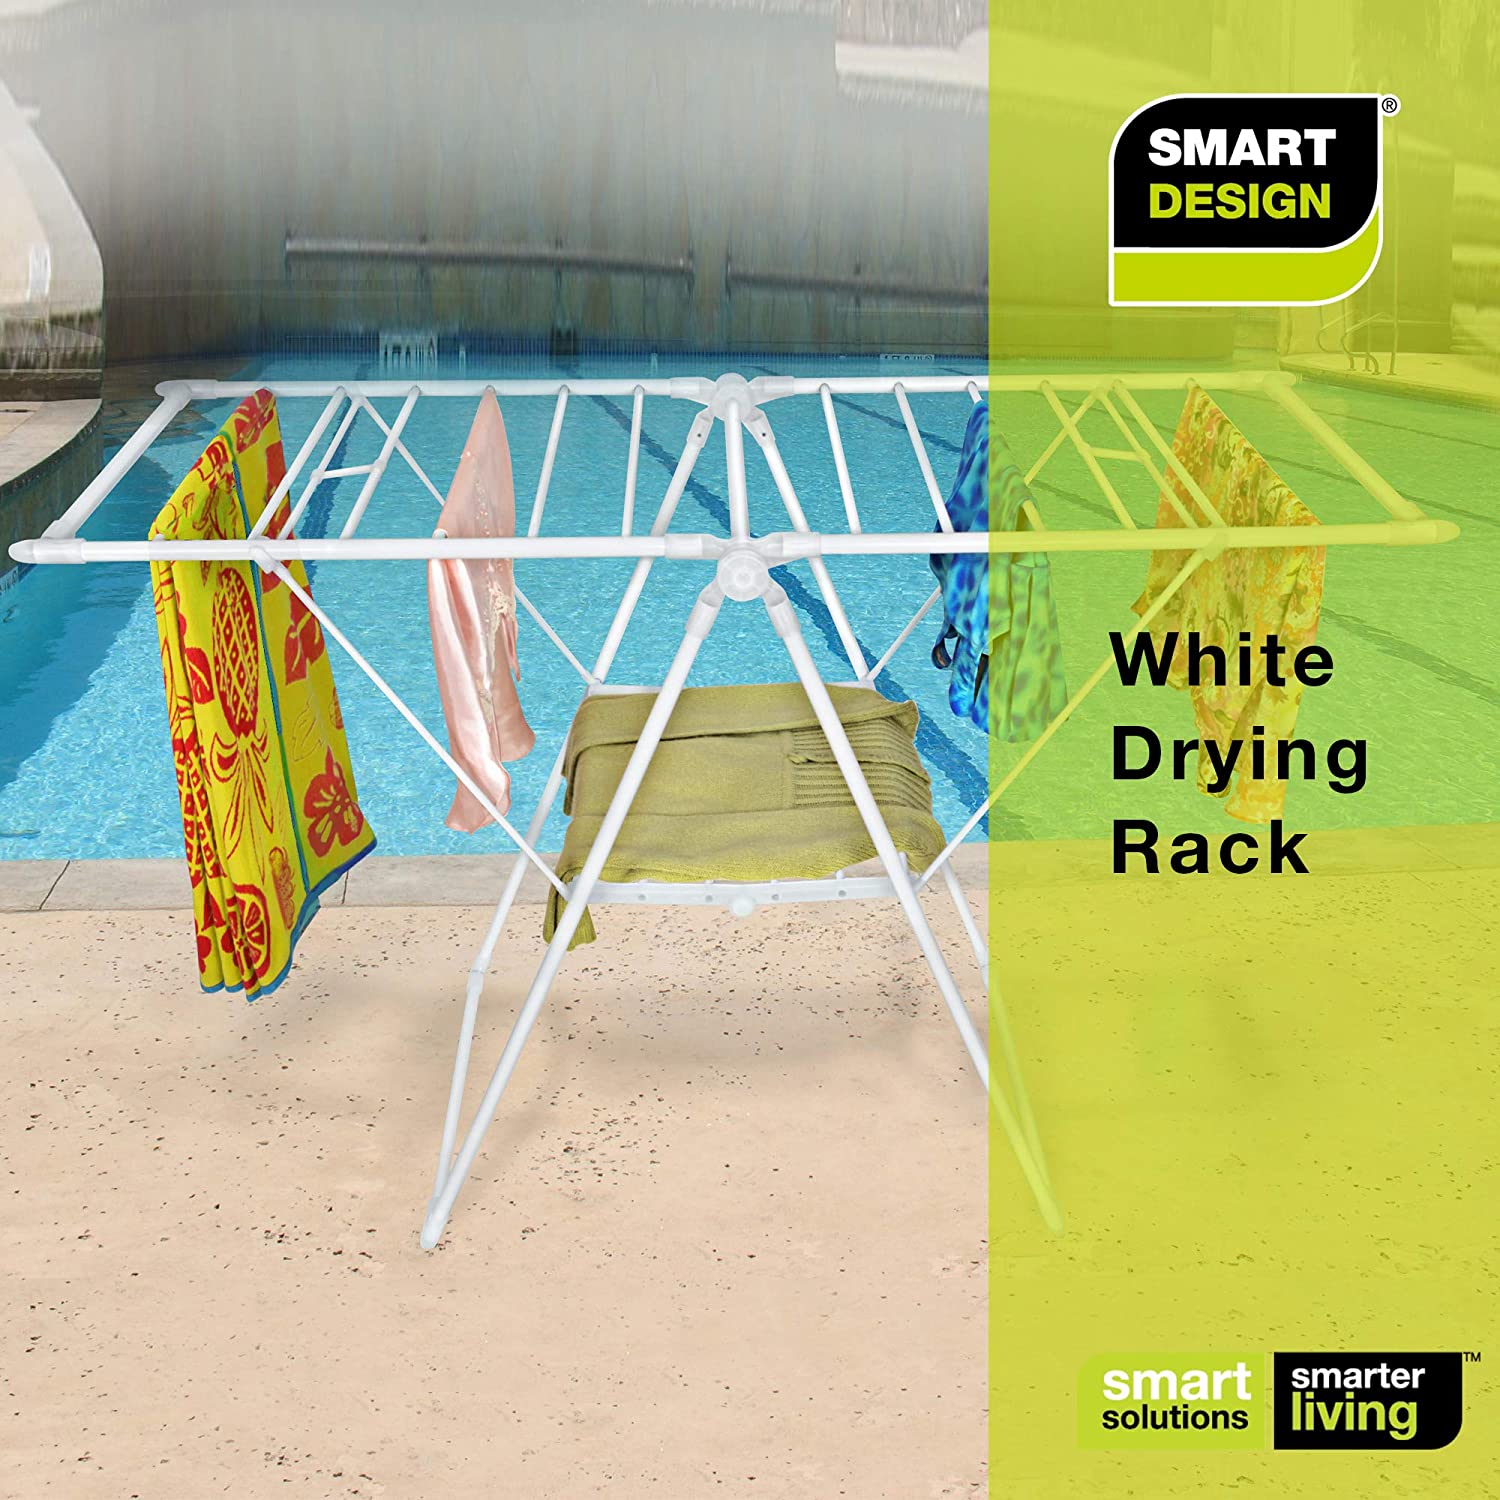 Foldable Clothes Drying Rack with Adjustable Wings - Smart Design® 7